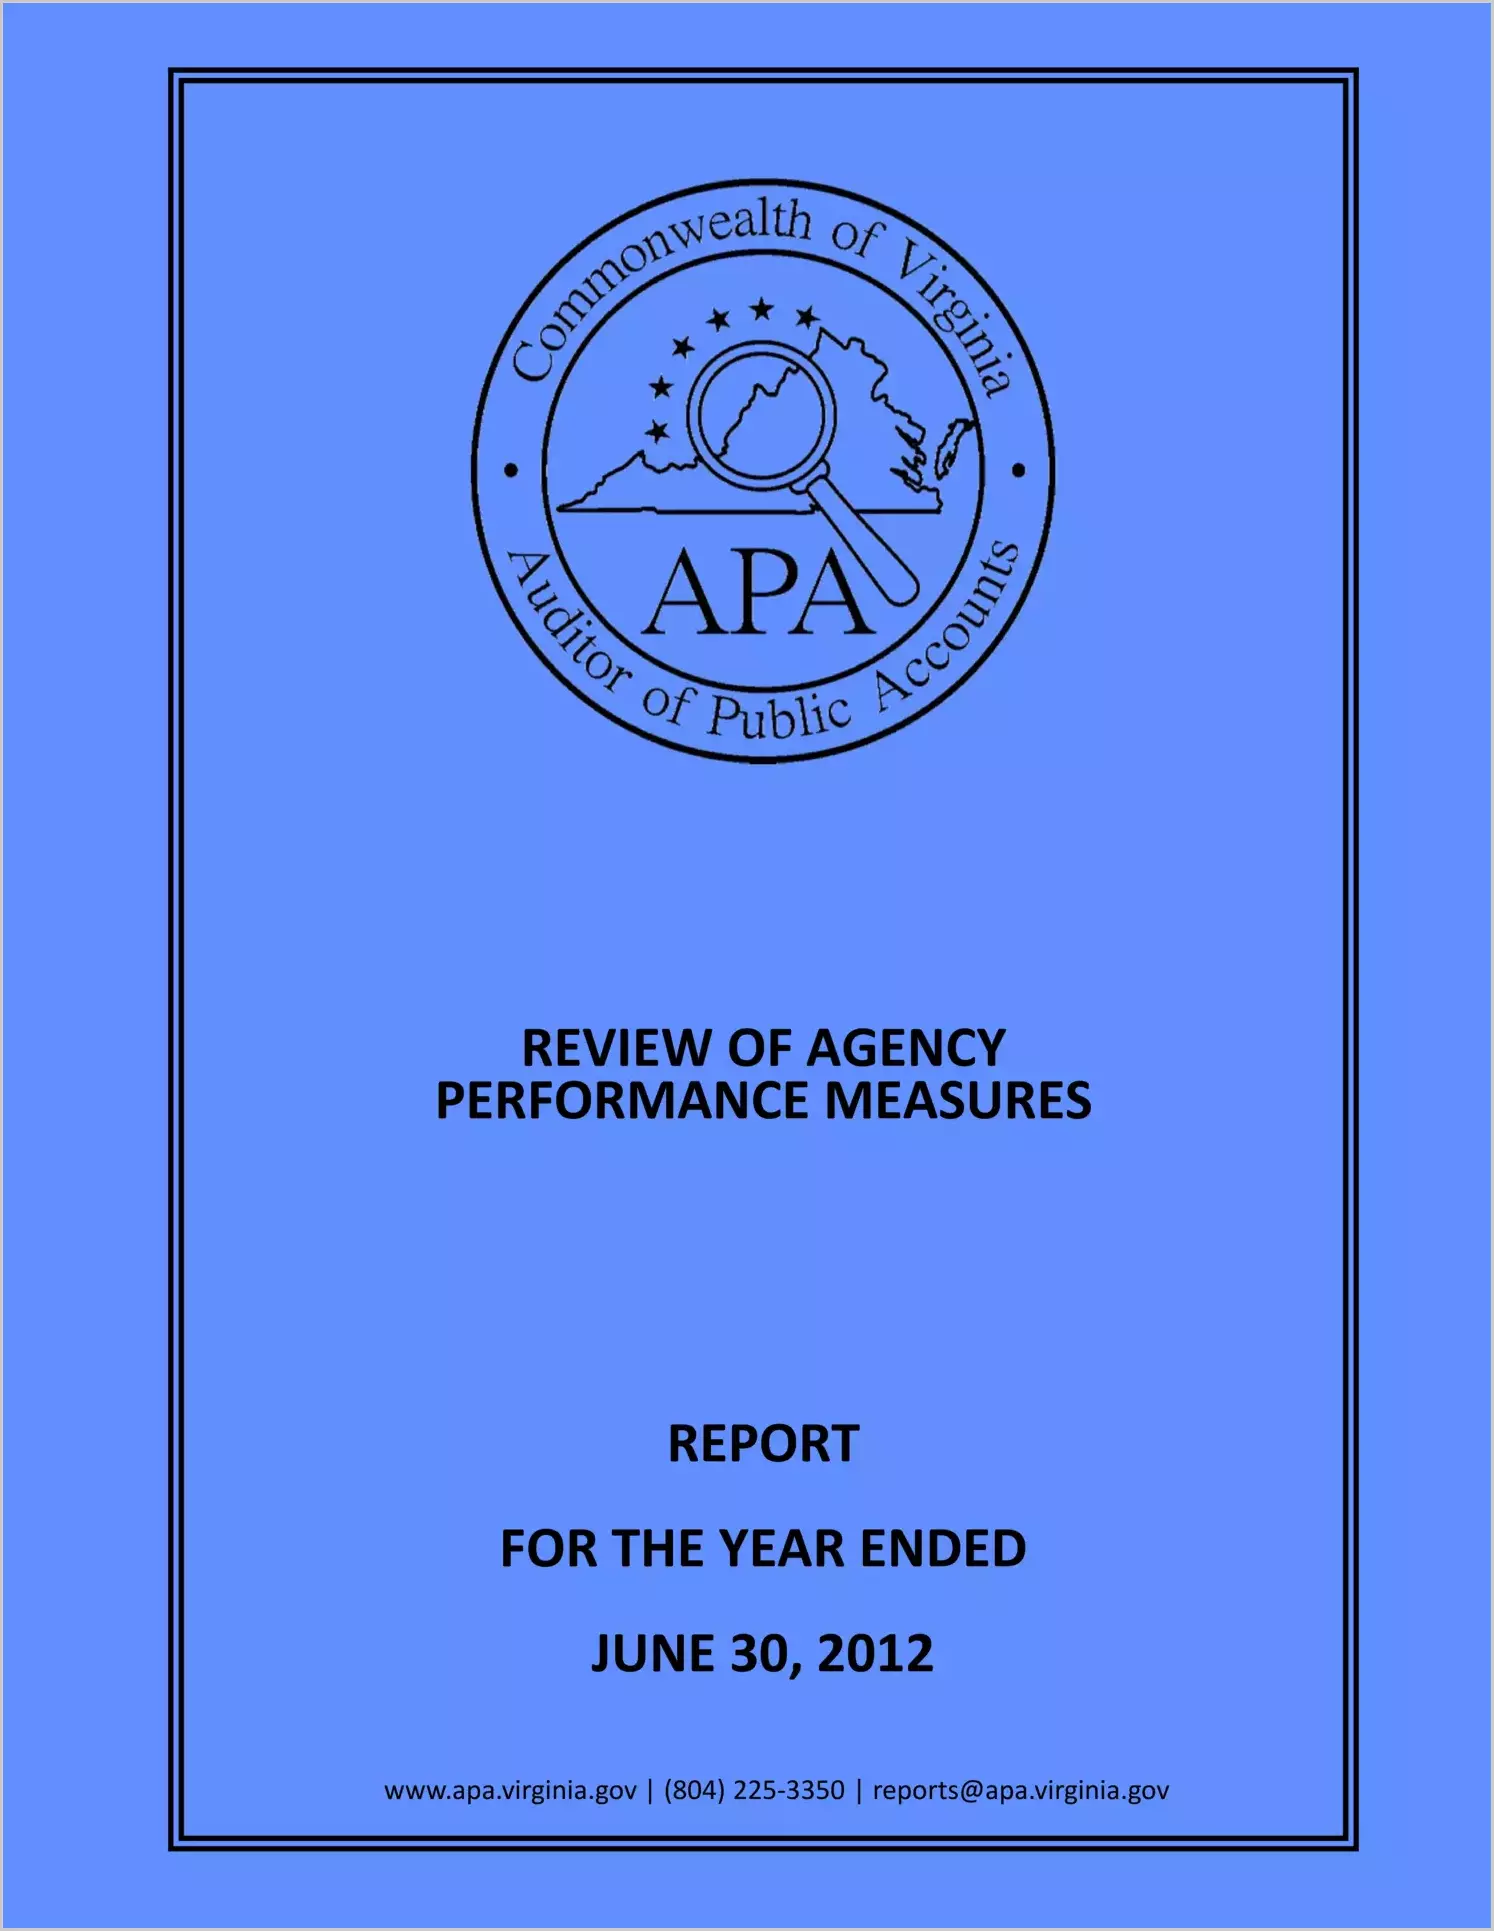 Review of Agency Performance Measures Report for the year ended June 30, 2012 - Full Report